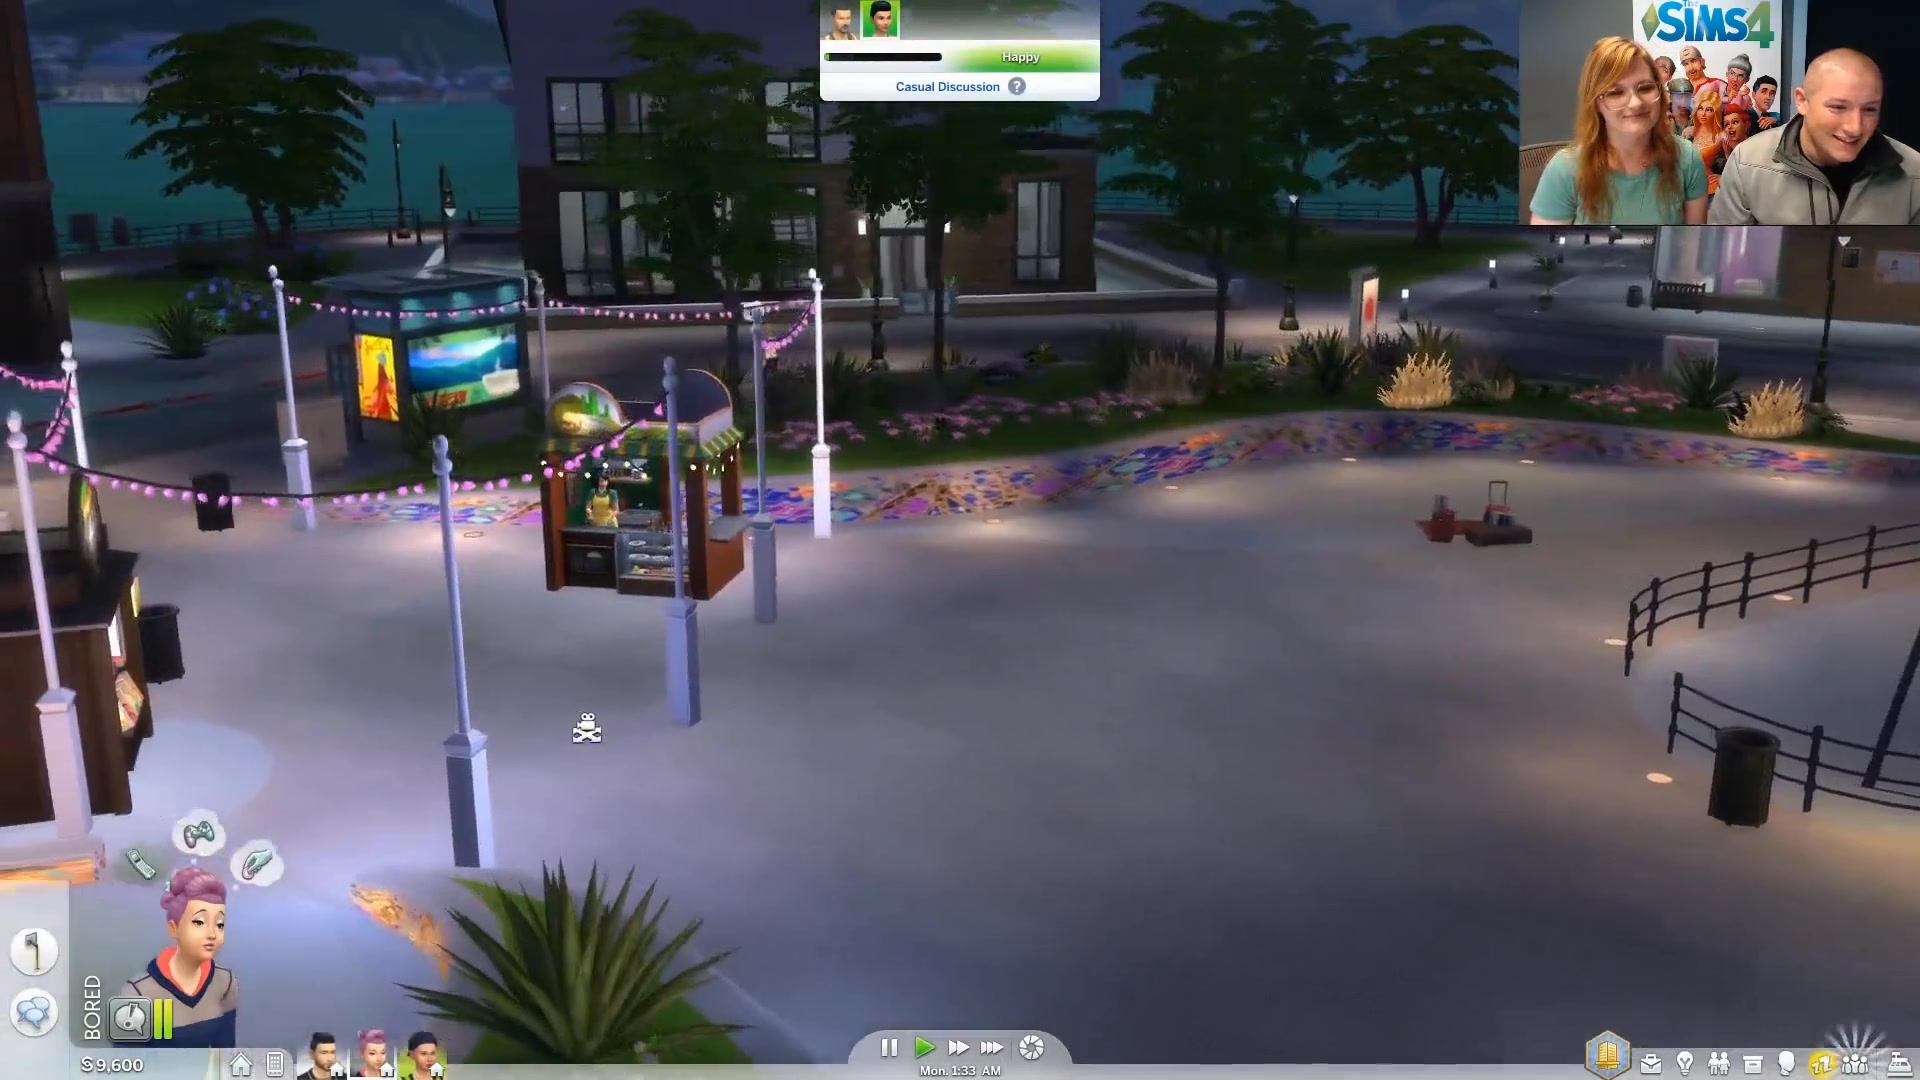 The Sims 4 City Living Crack CPY _ 3DM - Download PC Game [Tutorial] -  video Dailymotion